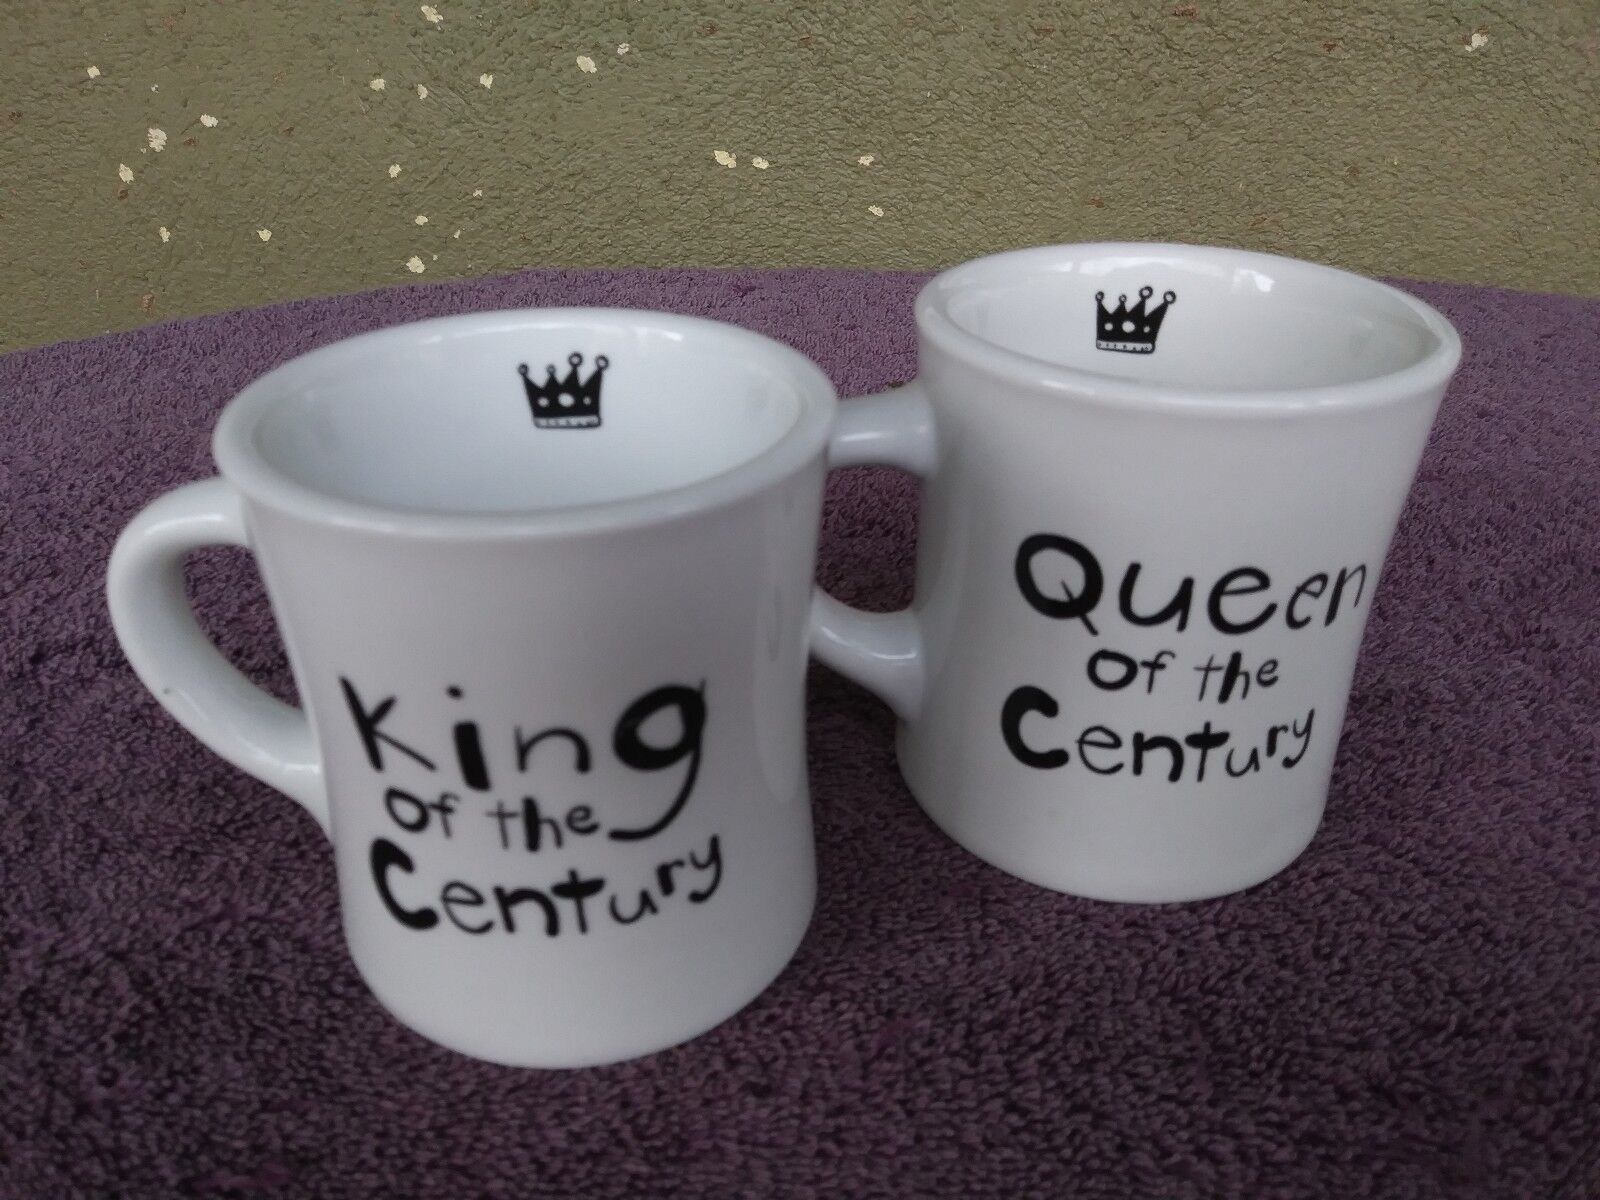  Wendy Tancock King & Queen of the Century 2 Ceramic Mugs Cups Crown Toronto